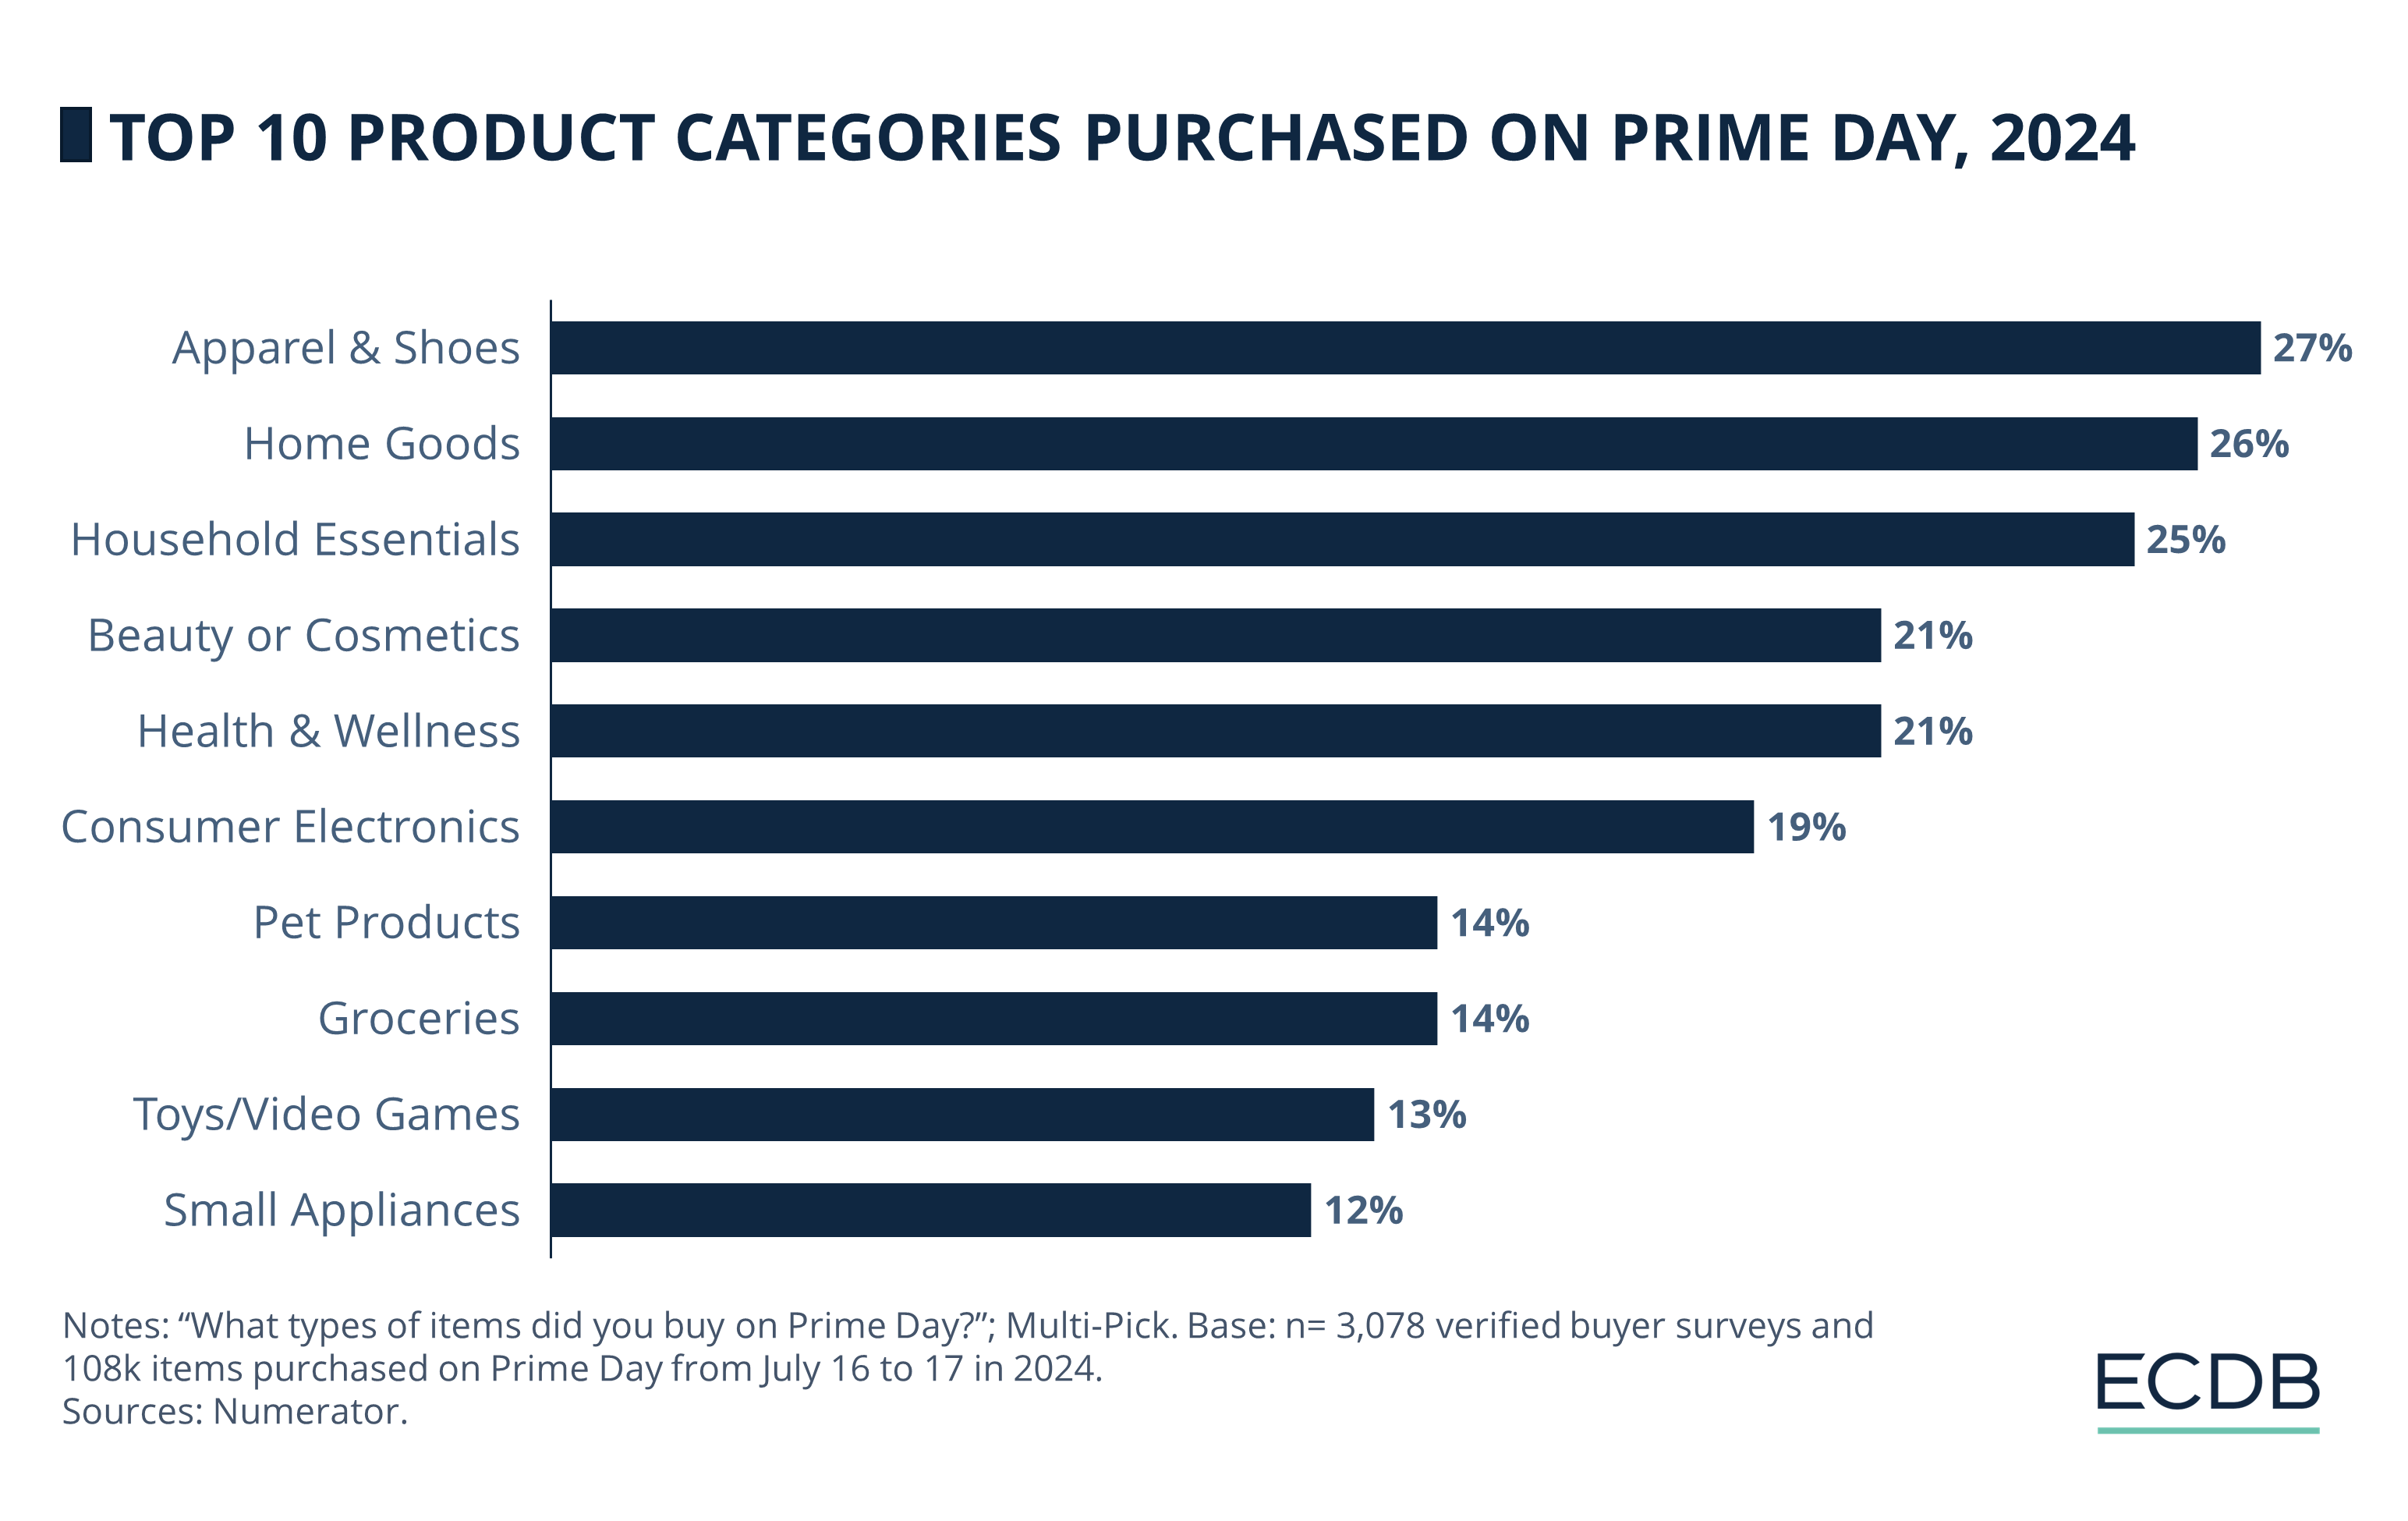 Top 10 Product Categories Purchased on Prime Day, 2024